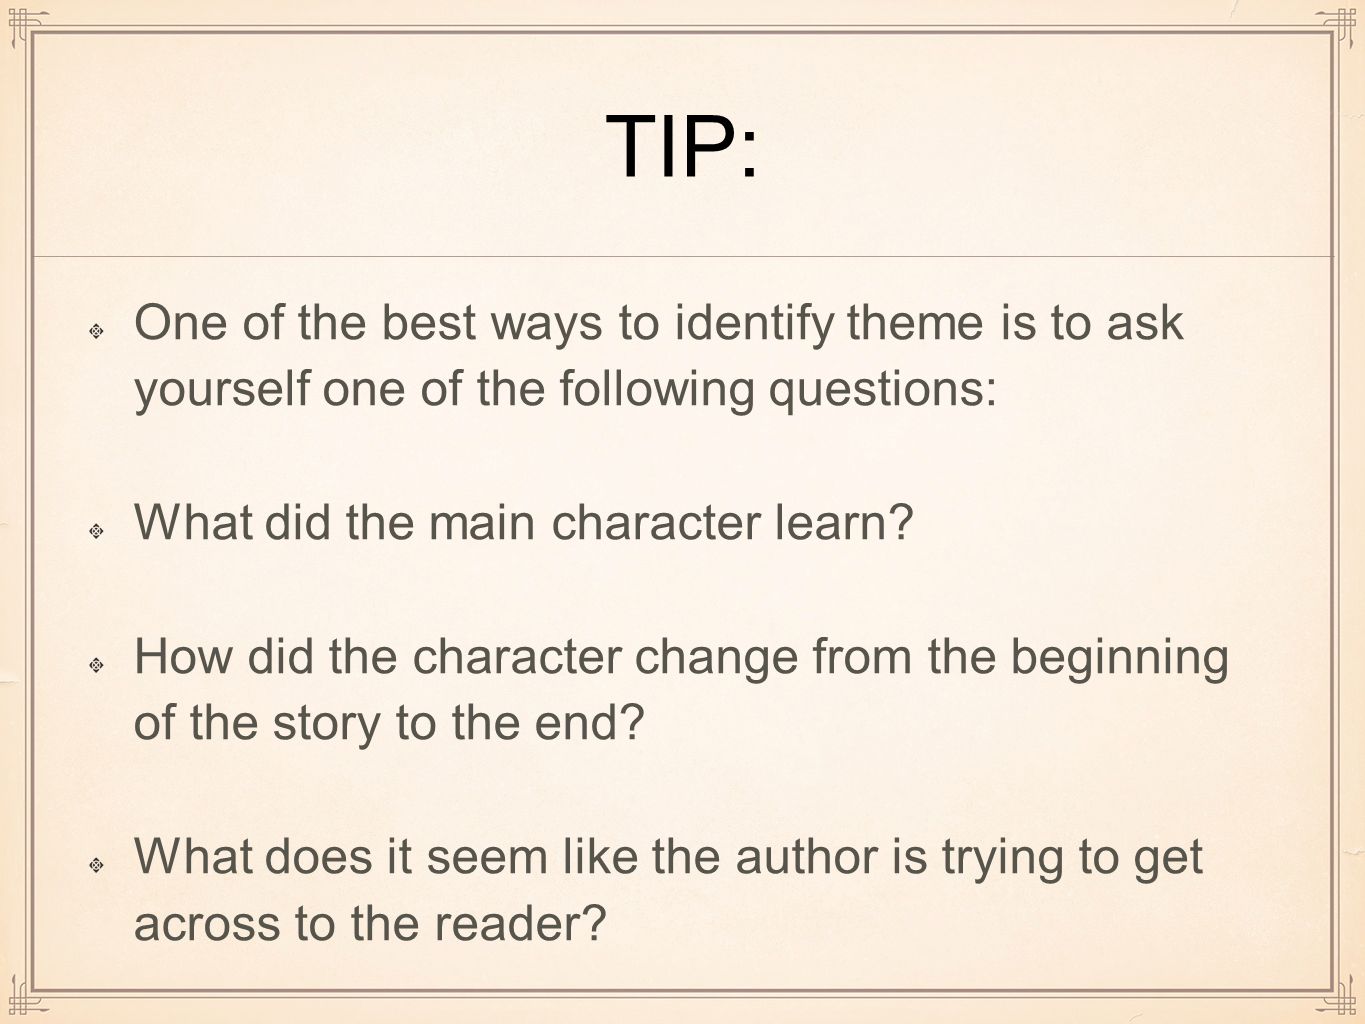 TIP: One of the best ways to identify theme is to ask yourself one of the following questions: What did the main character learn.